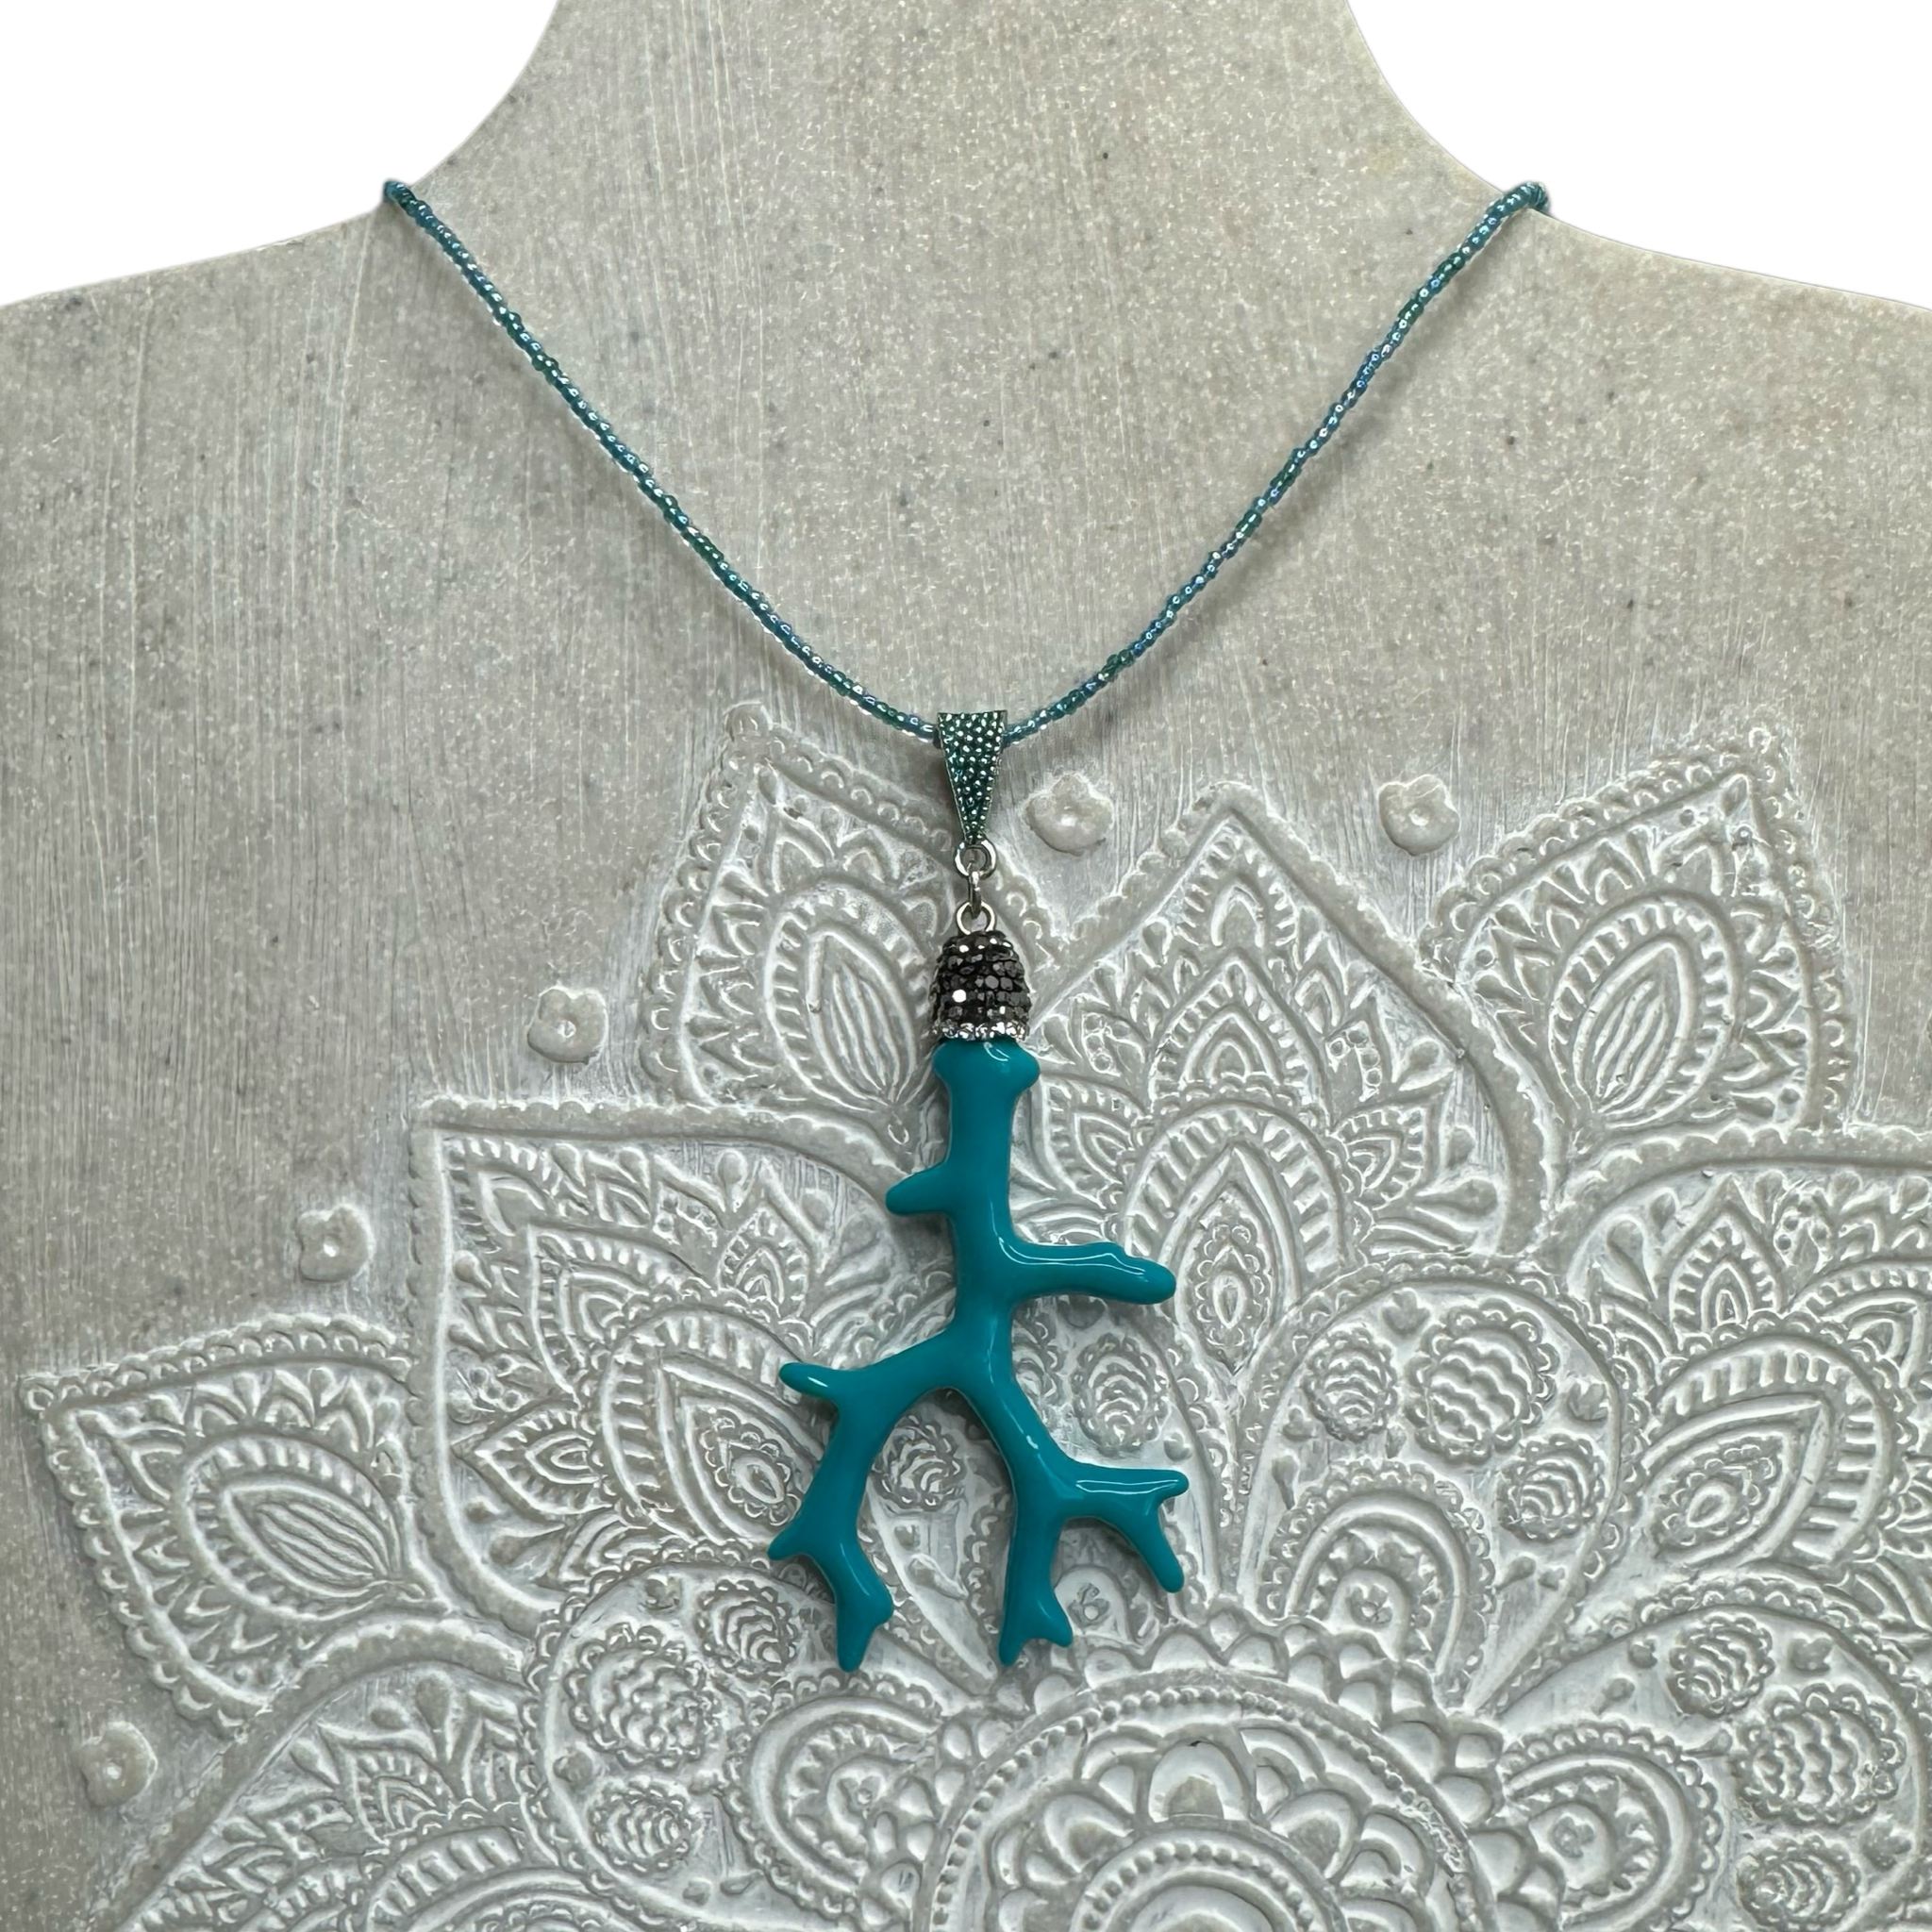 Turquoise Coral Branch and Czech crystal necklace